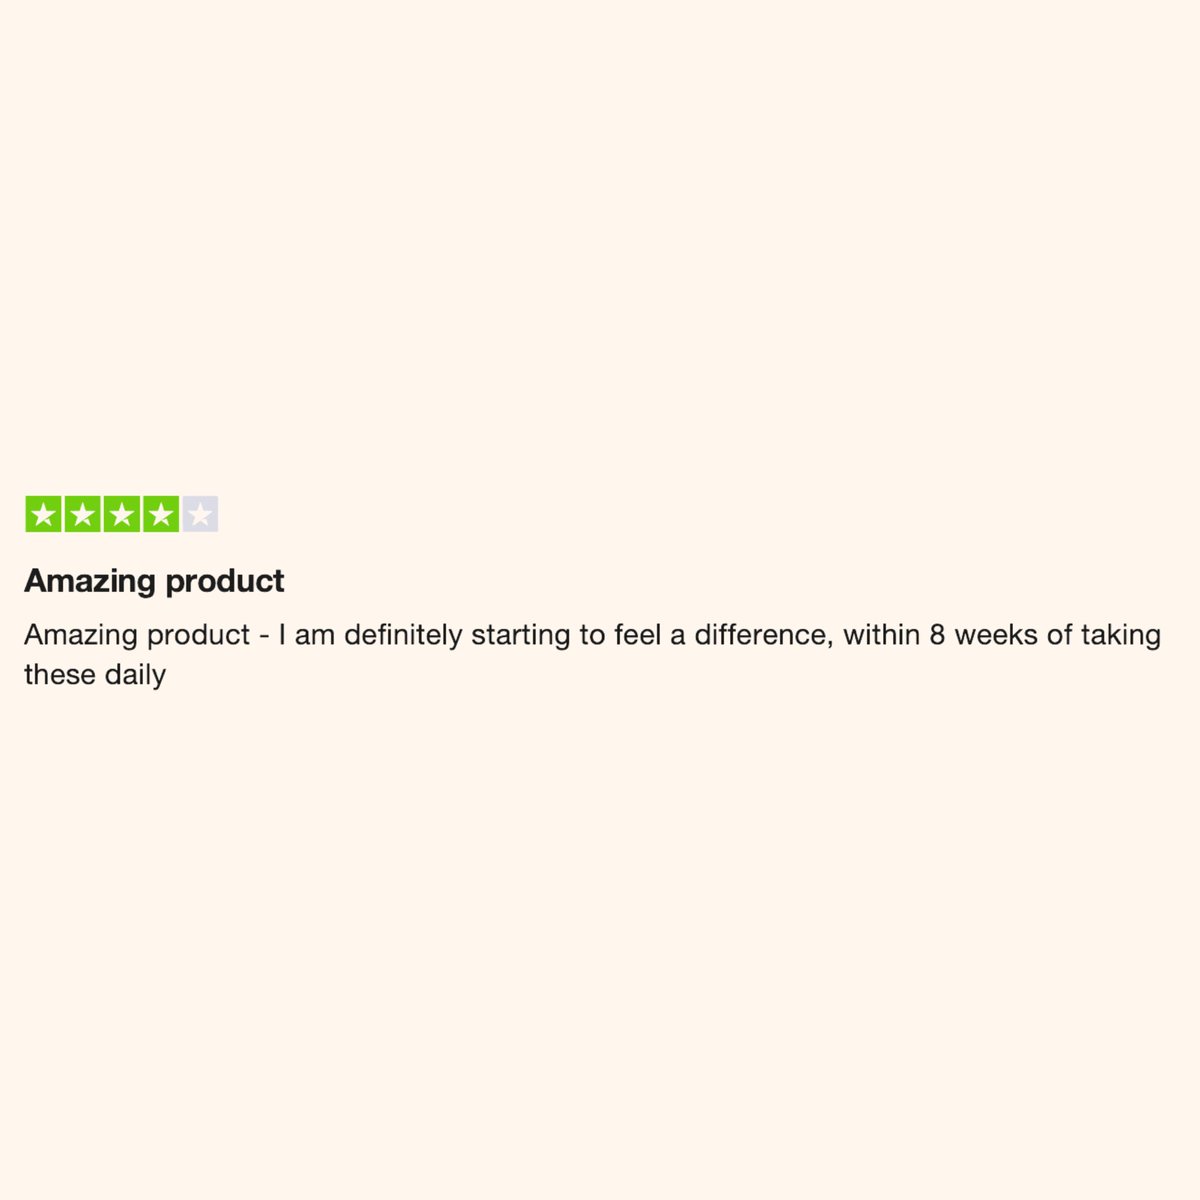 ⭐⭐⭐⭐⭐ Last month's reviews are in, and they're glowing! We're so grateful for our amazing community. Reading your reviews about how our turmeric shots are helping you is truly what makes it all worthwhile.